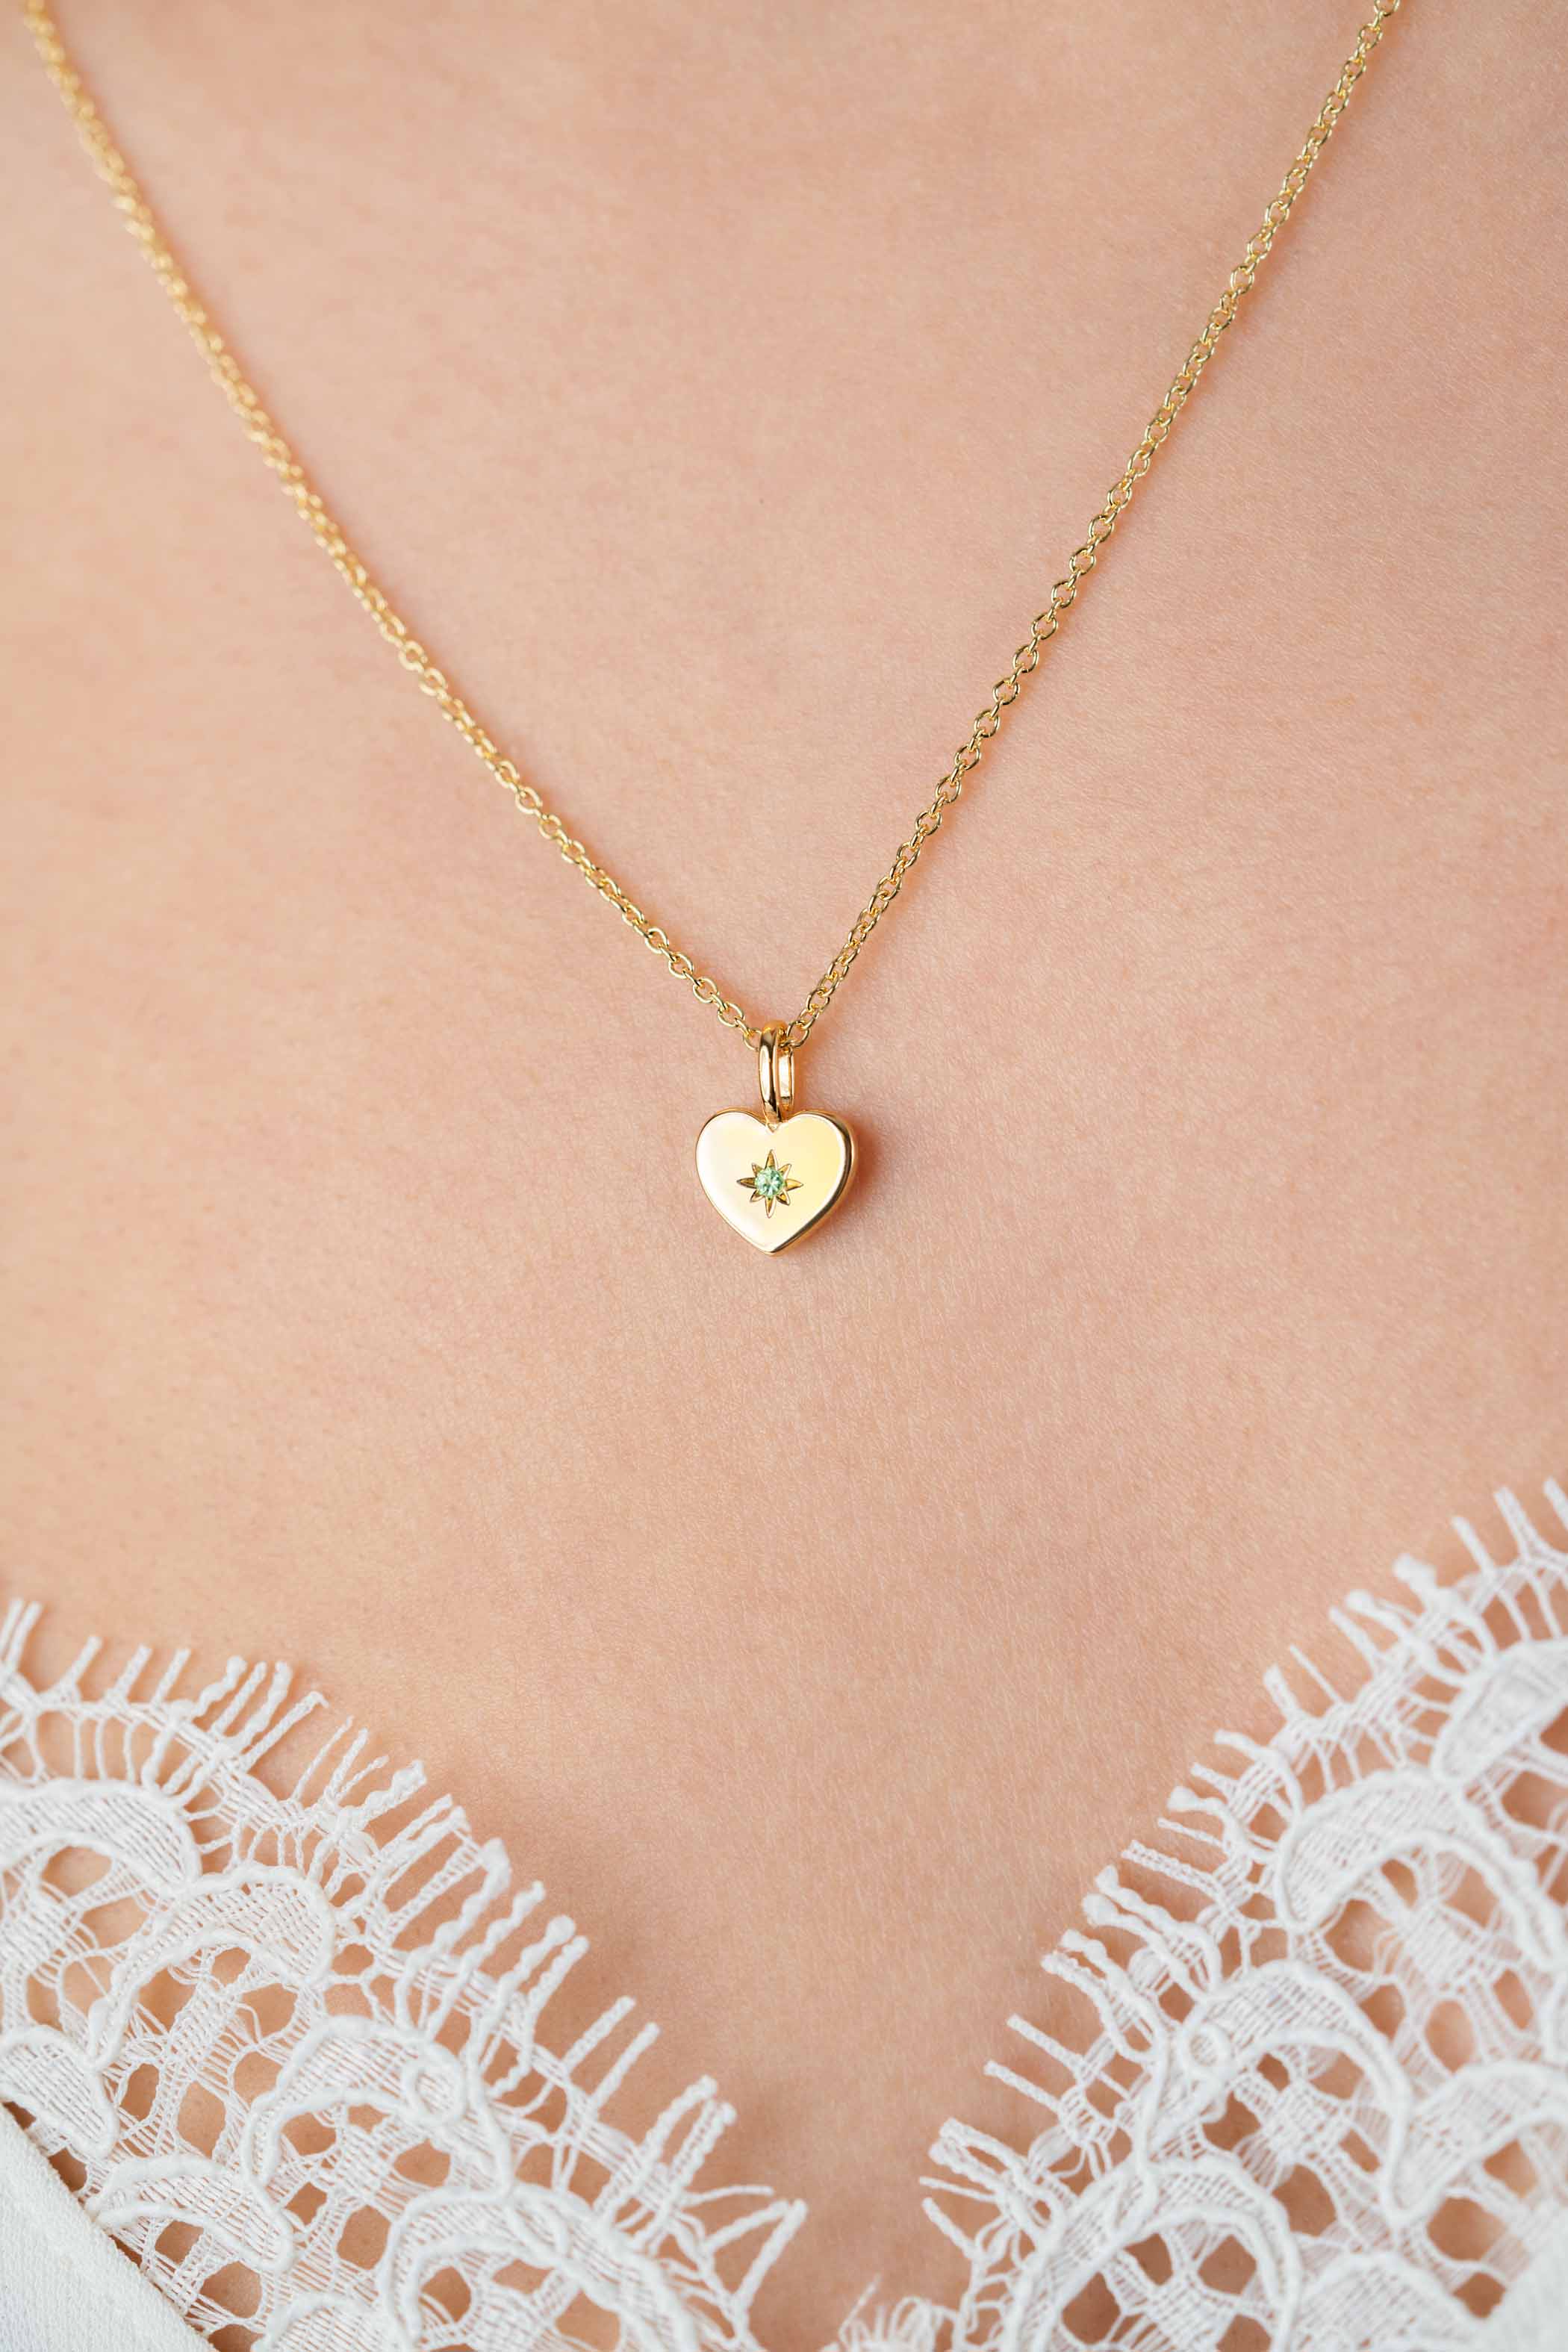 AUGUST Pendant 12mm Gold Plated Heart Birthstone Green Peridot Zirconia (excl. necklace)